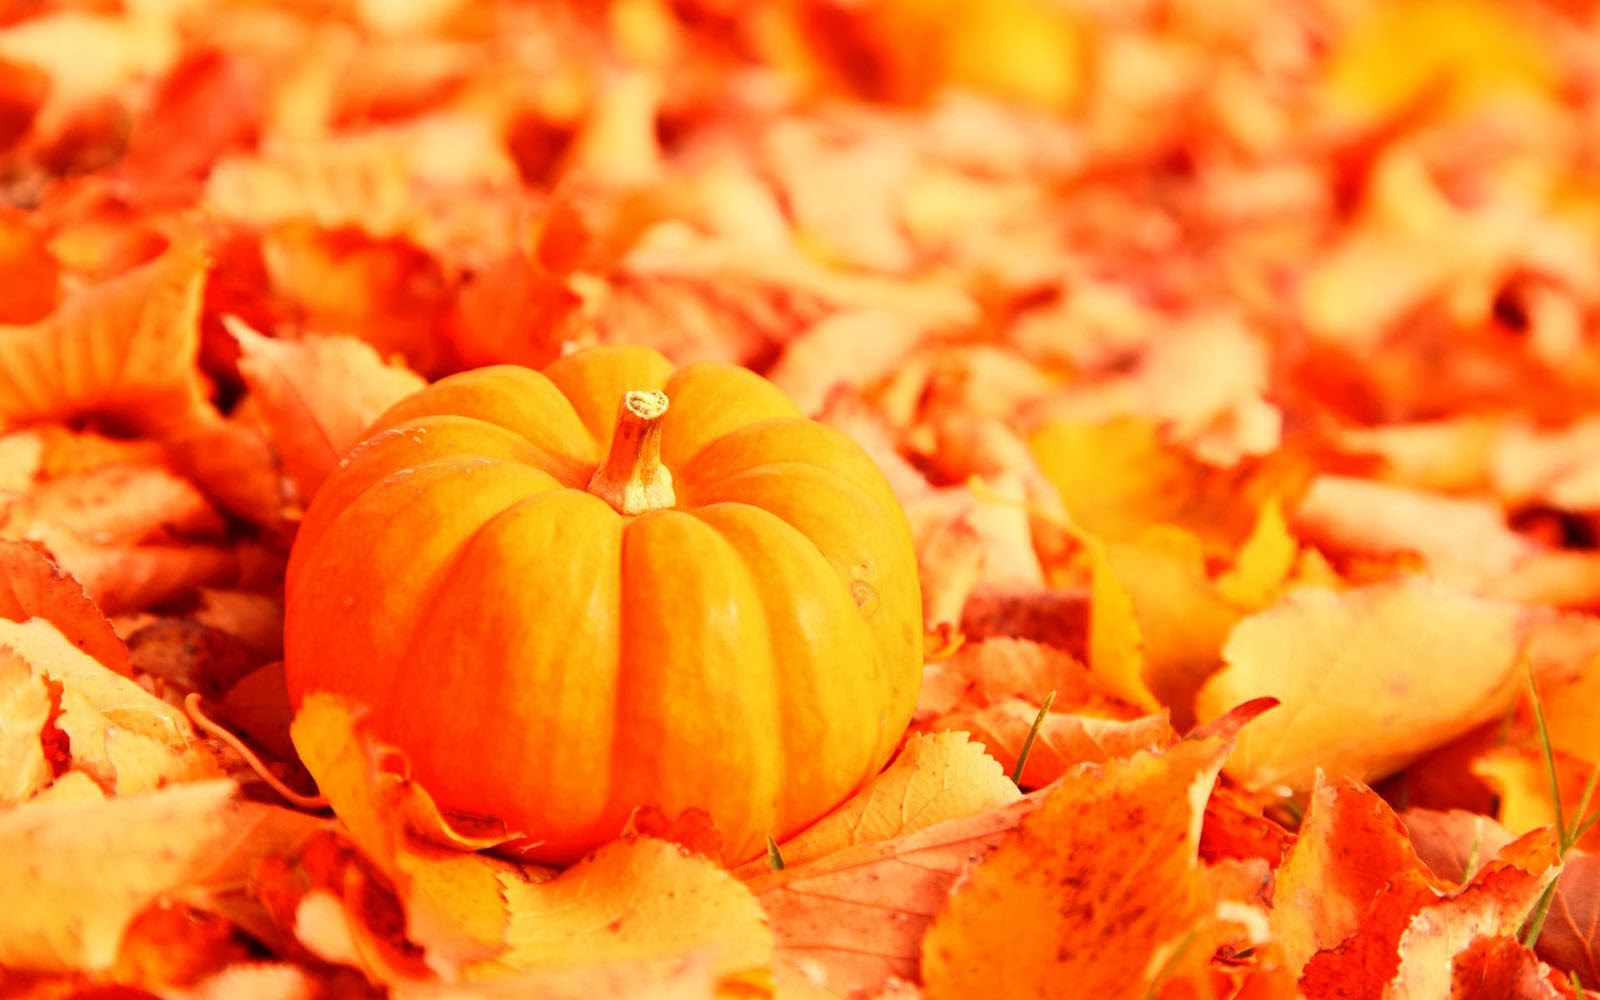 Pumpkin Wallpaper Background Photos Image Andpictures For